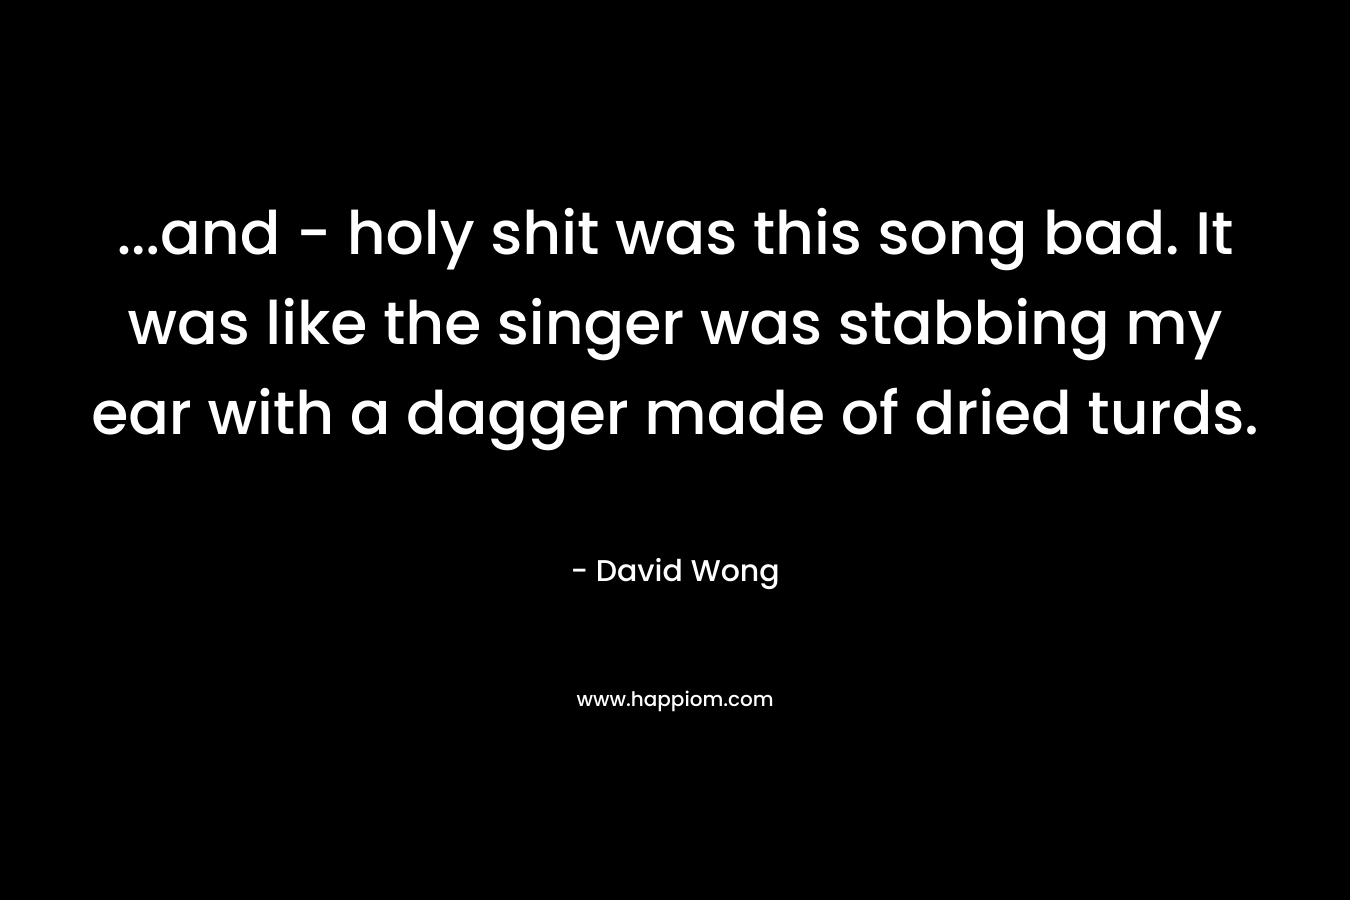 …and – holy shit was this song bad. It was like the singer was stabbing my ear with a dagger made of dried turds. – David Wong